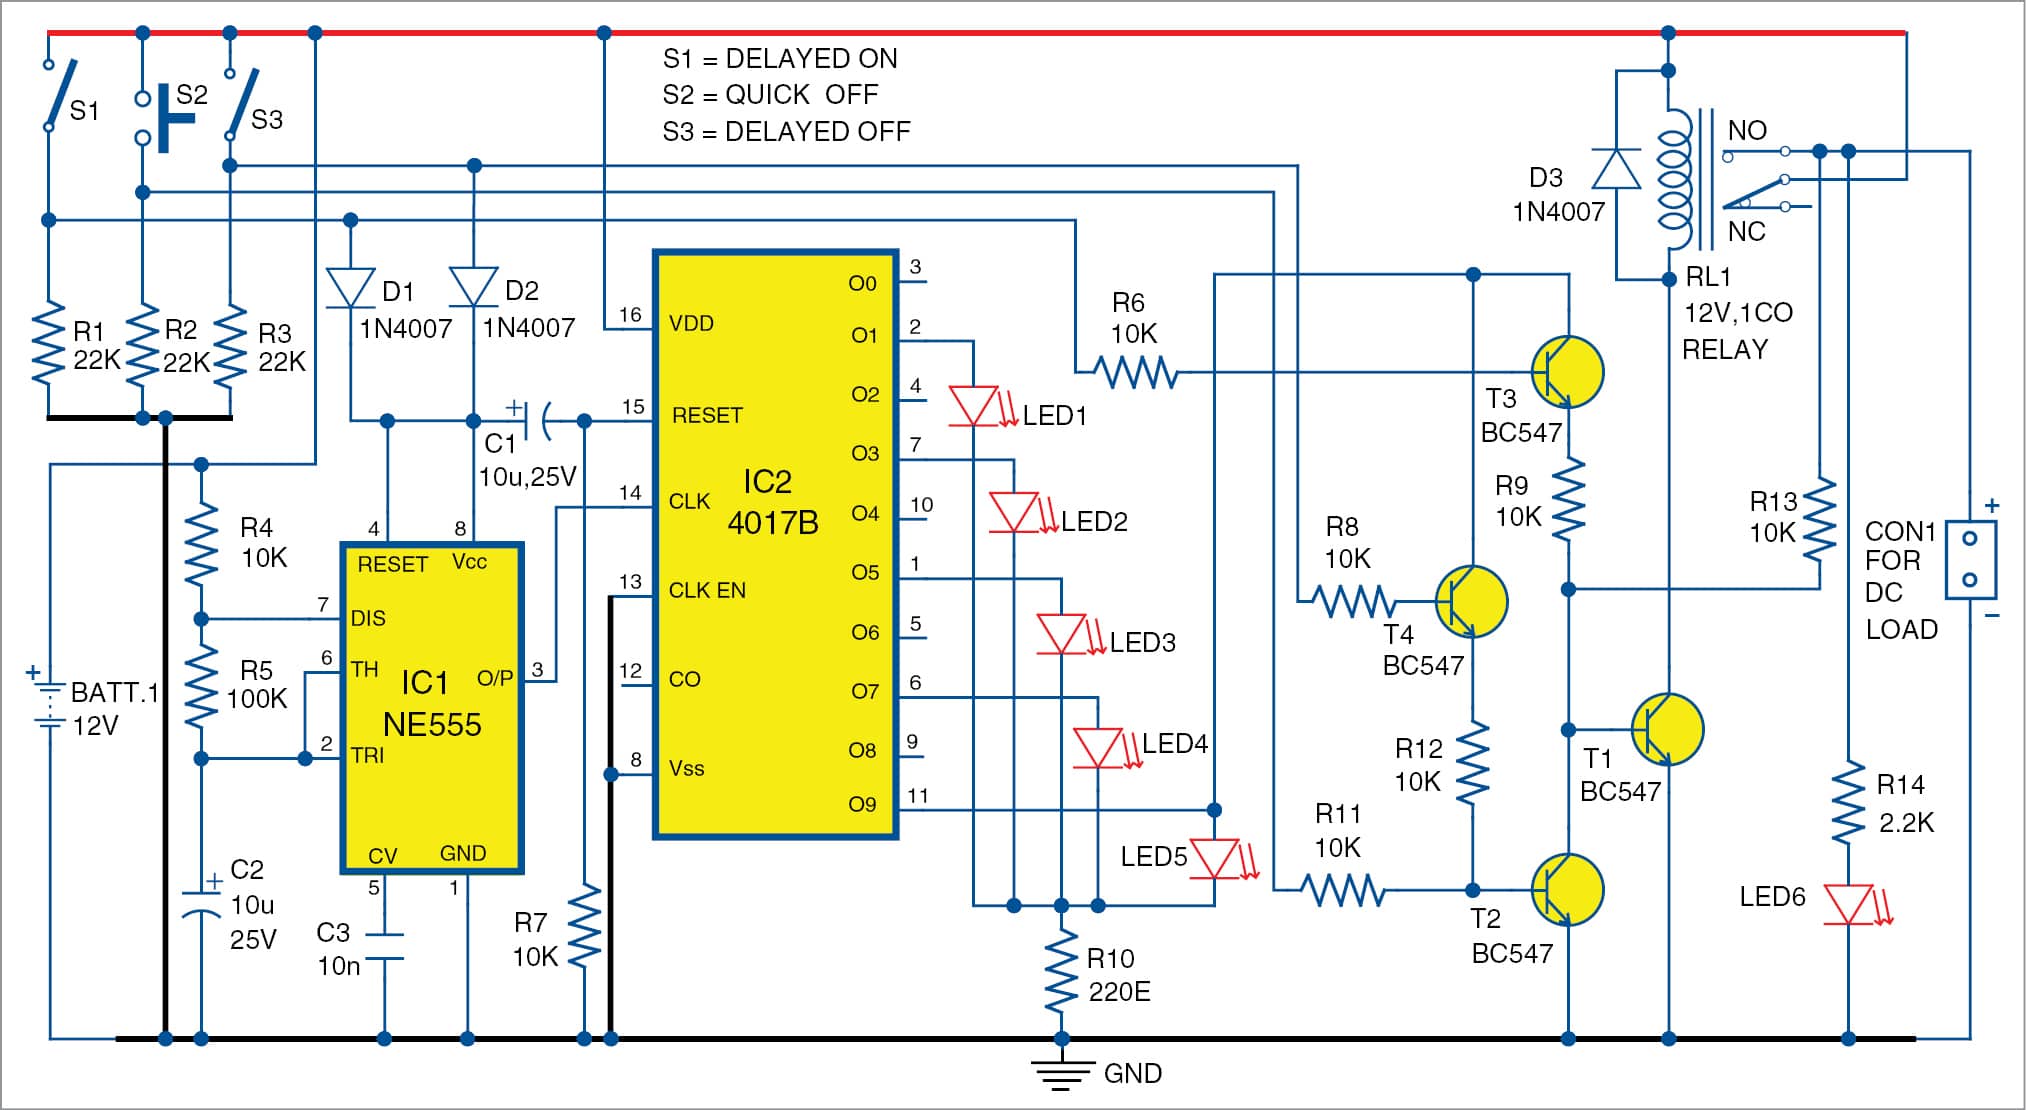 Circuit diagram for accidental switching protection